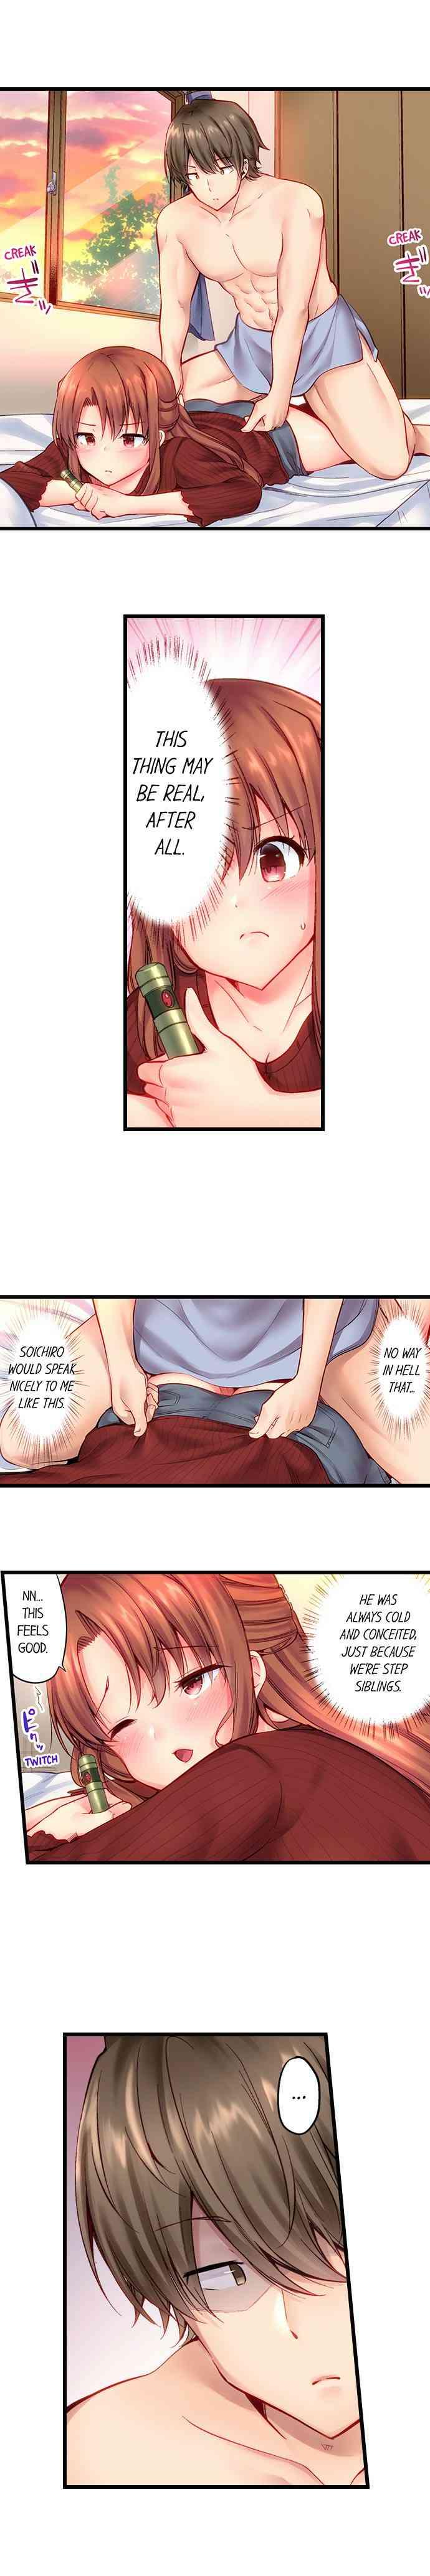 [Yuuki HB] "Hypnotized" Sex with My Brother Ch.5/? [English] [Ongoing]